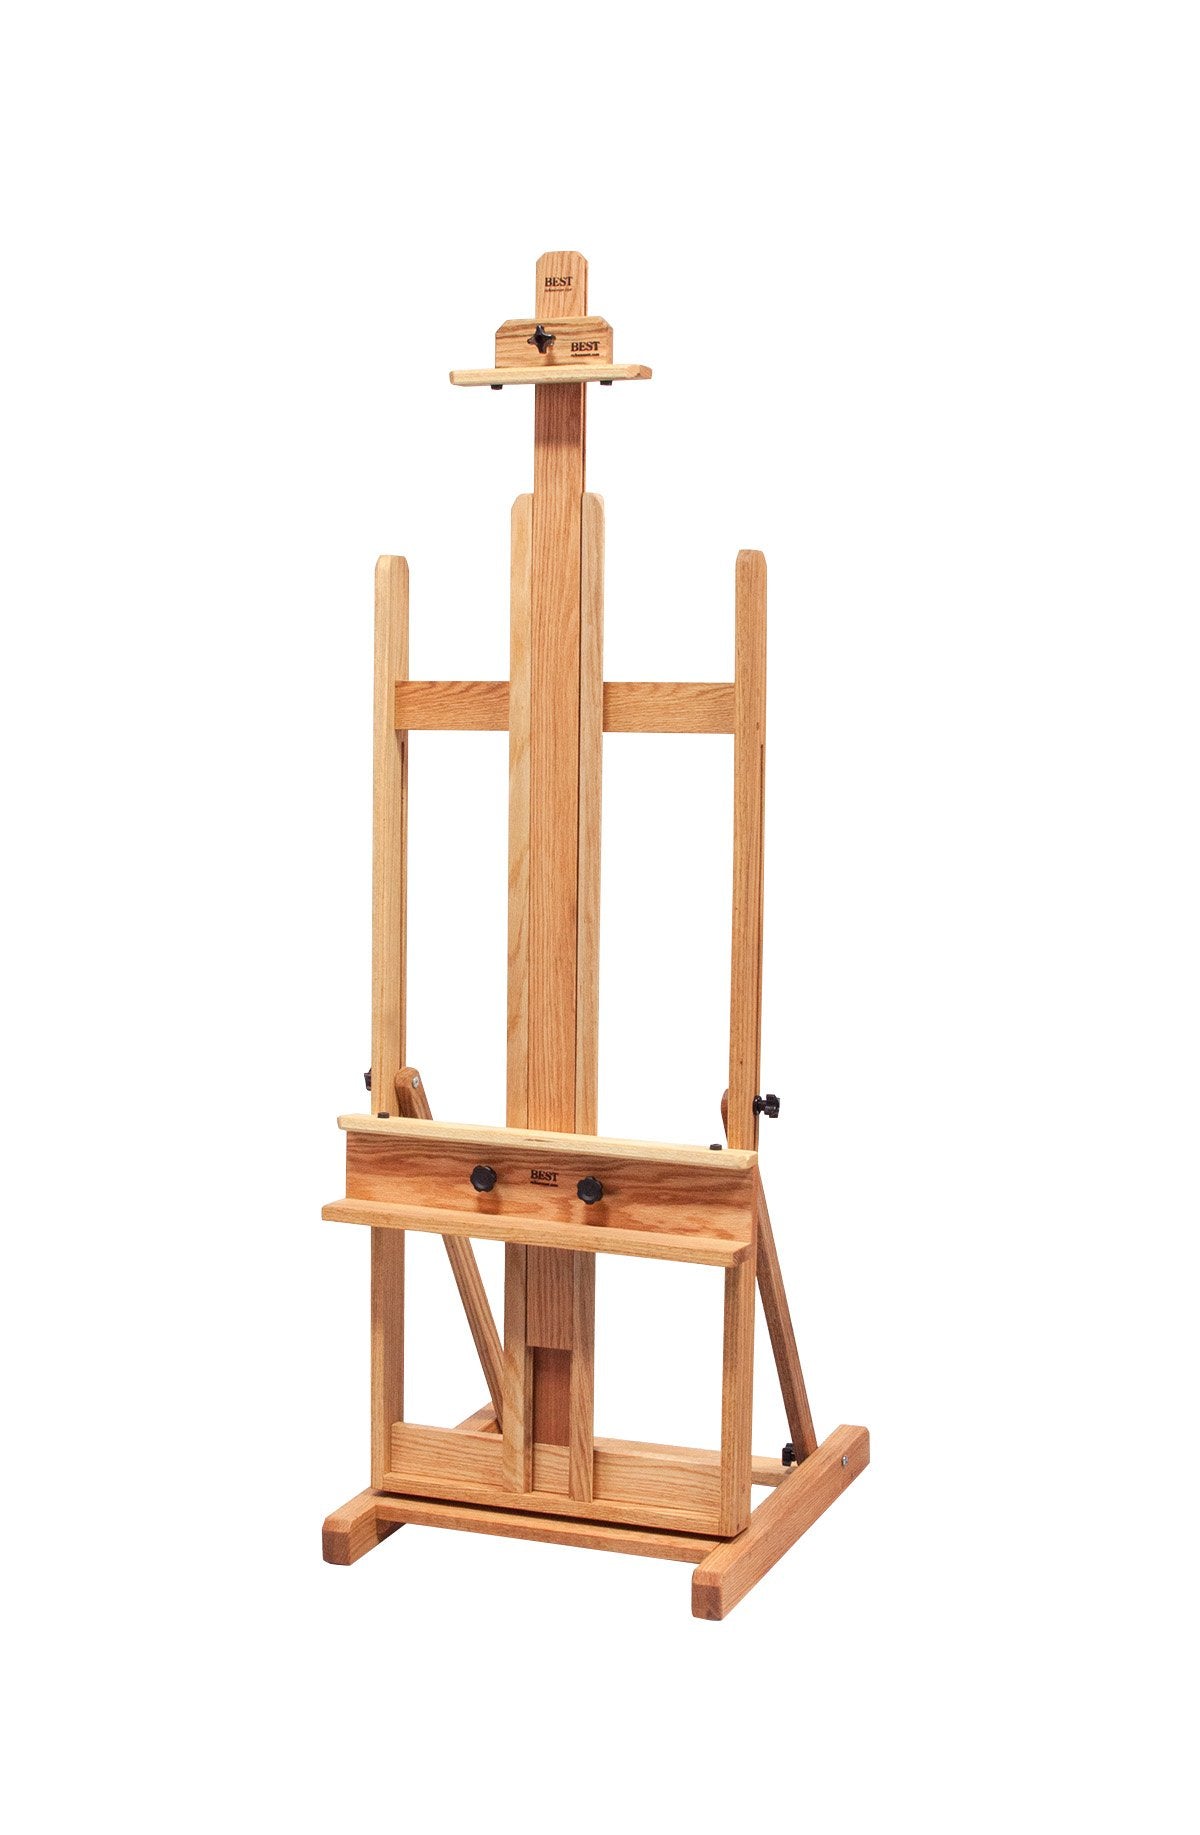 Mahl Stick by Artristic - Perfect companion to your STUDIO easel